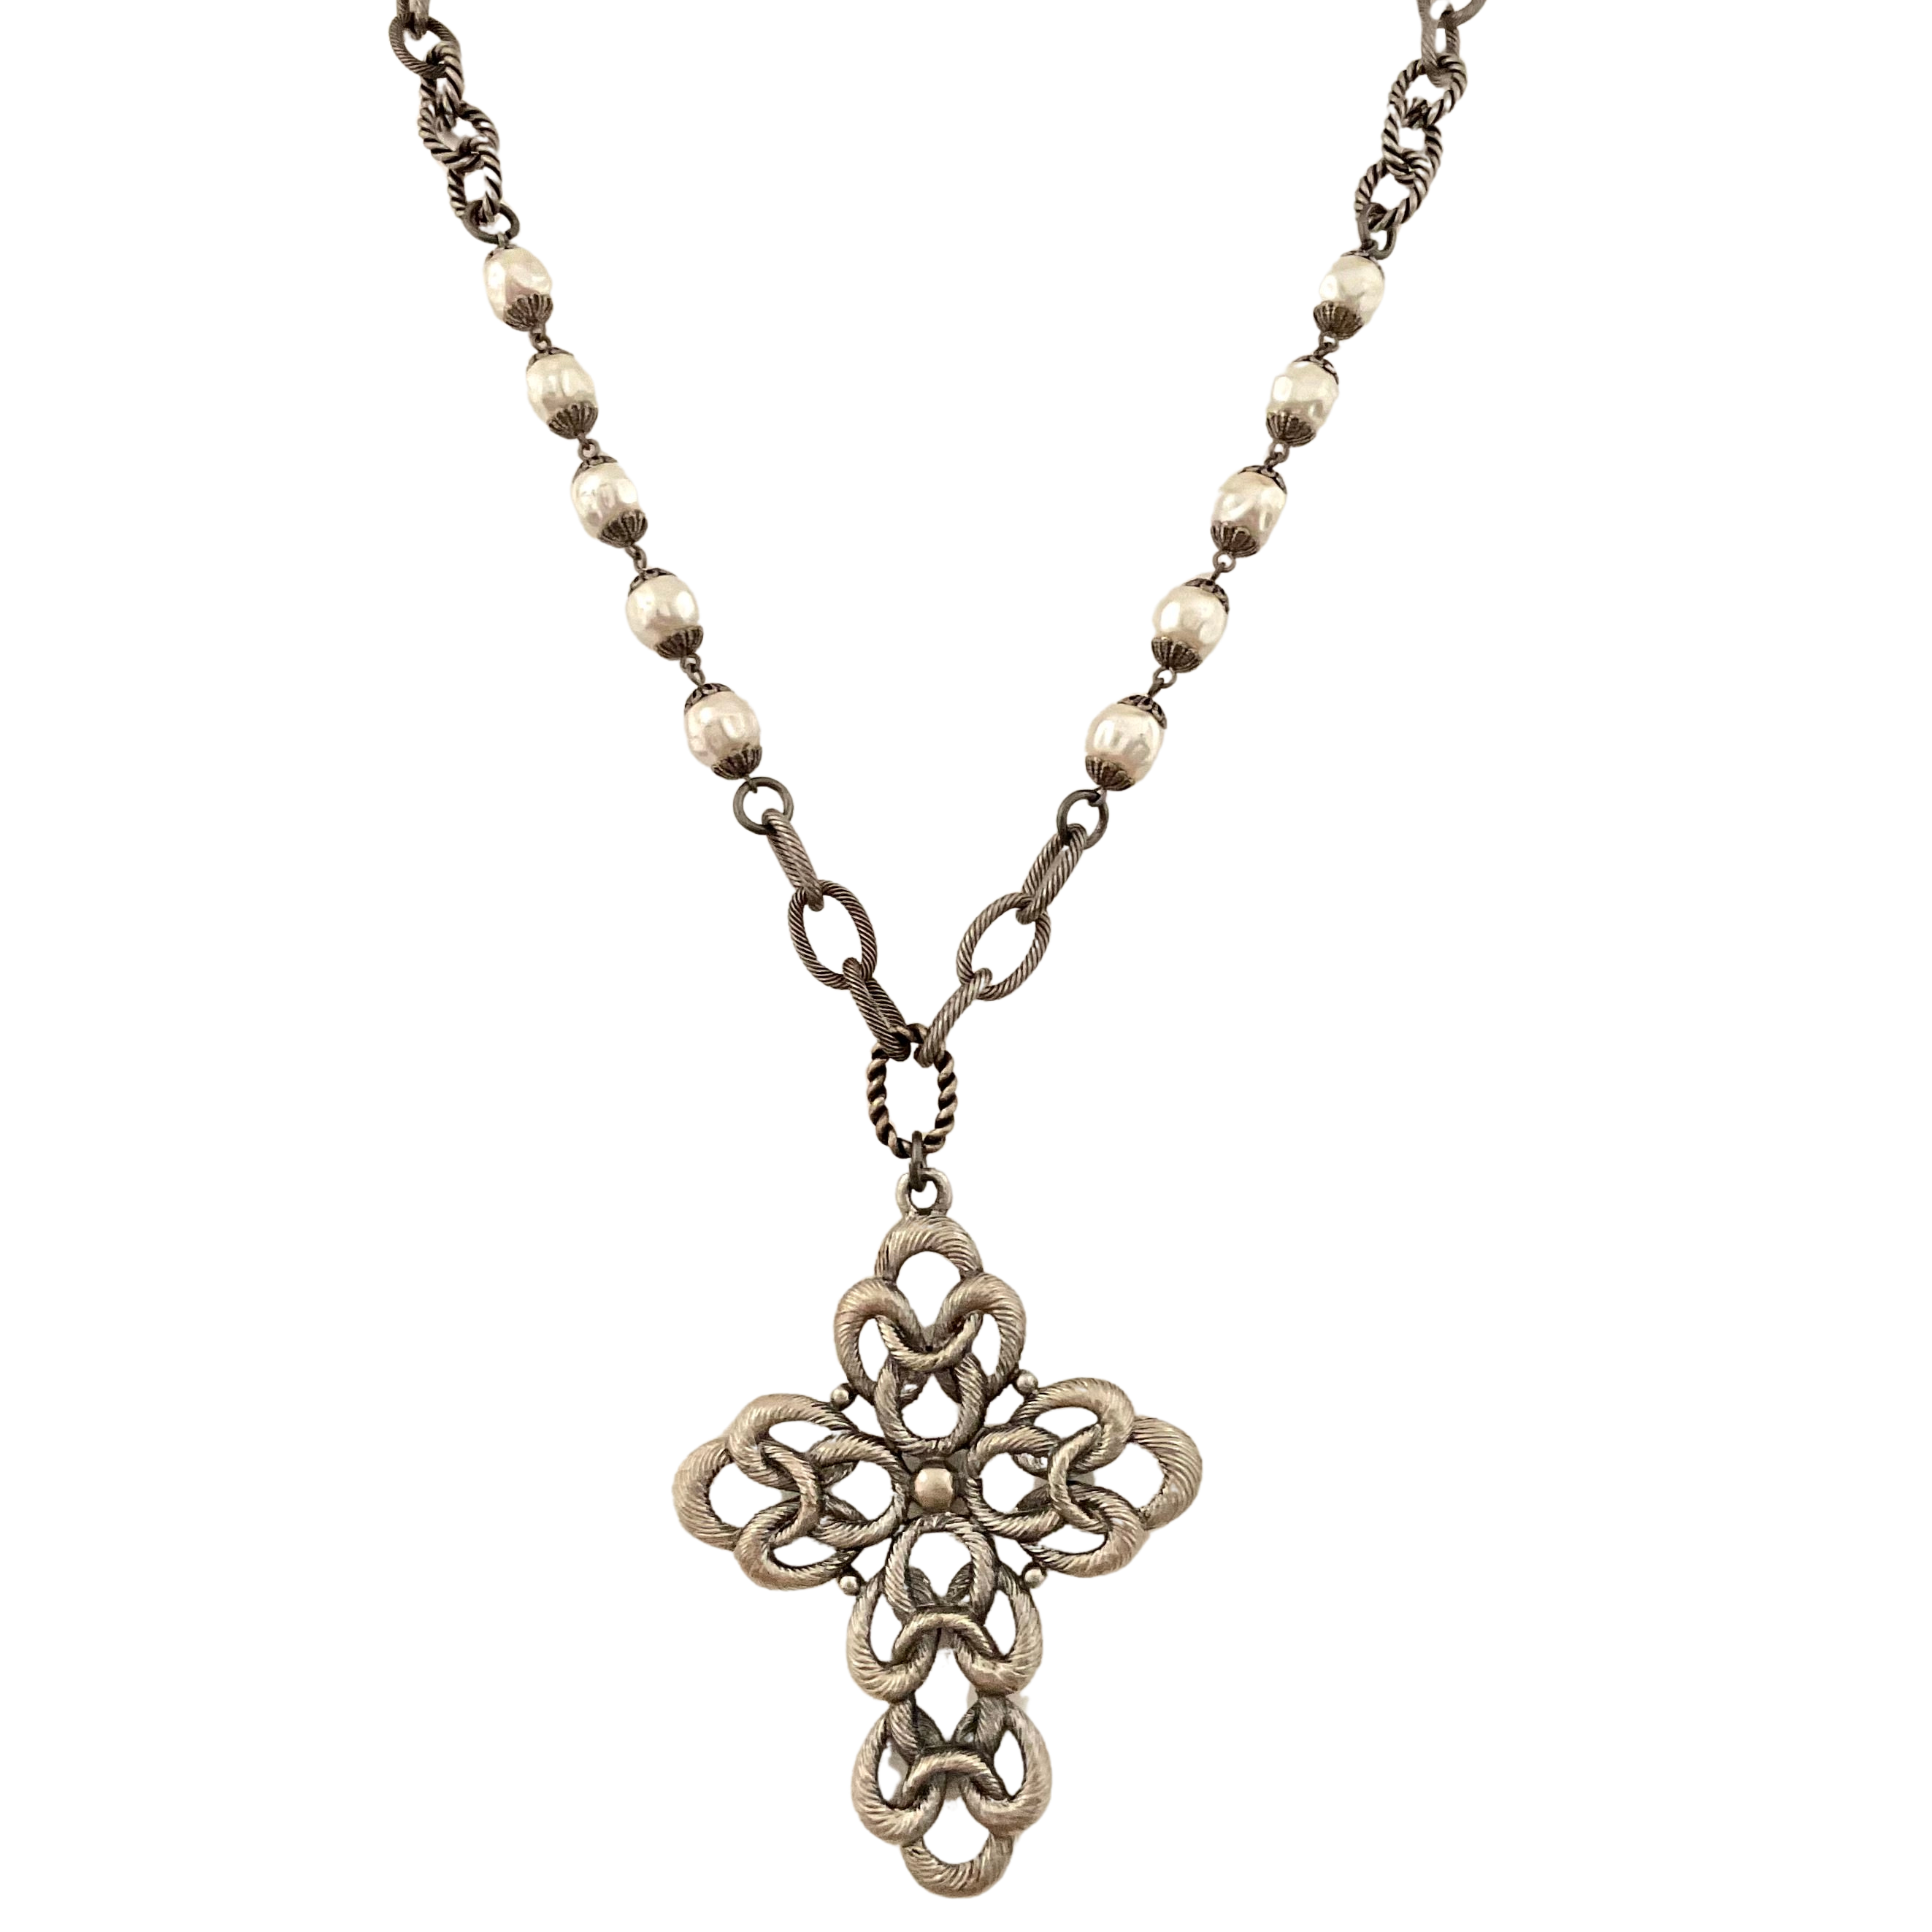 Antique Silver Chain with Vintage Cross Pendant 40